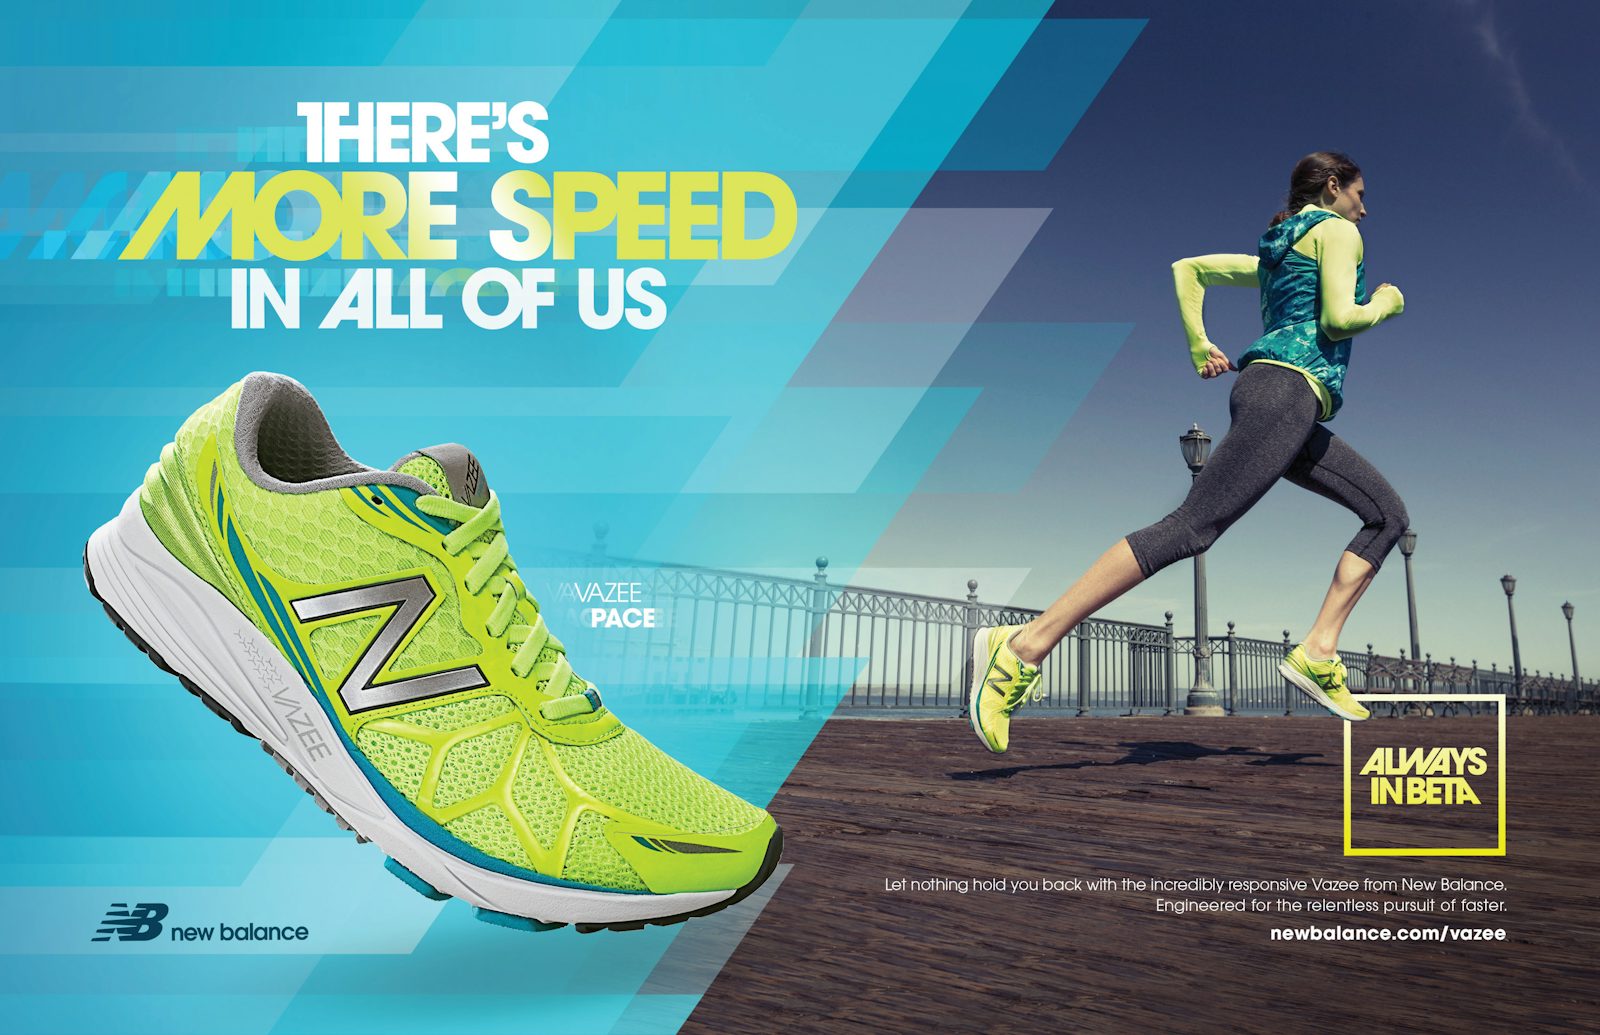 New Balance is reinvigorating brand move away from its lifestyle image